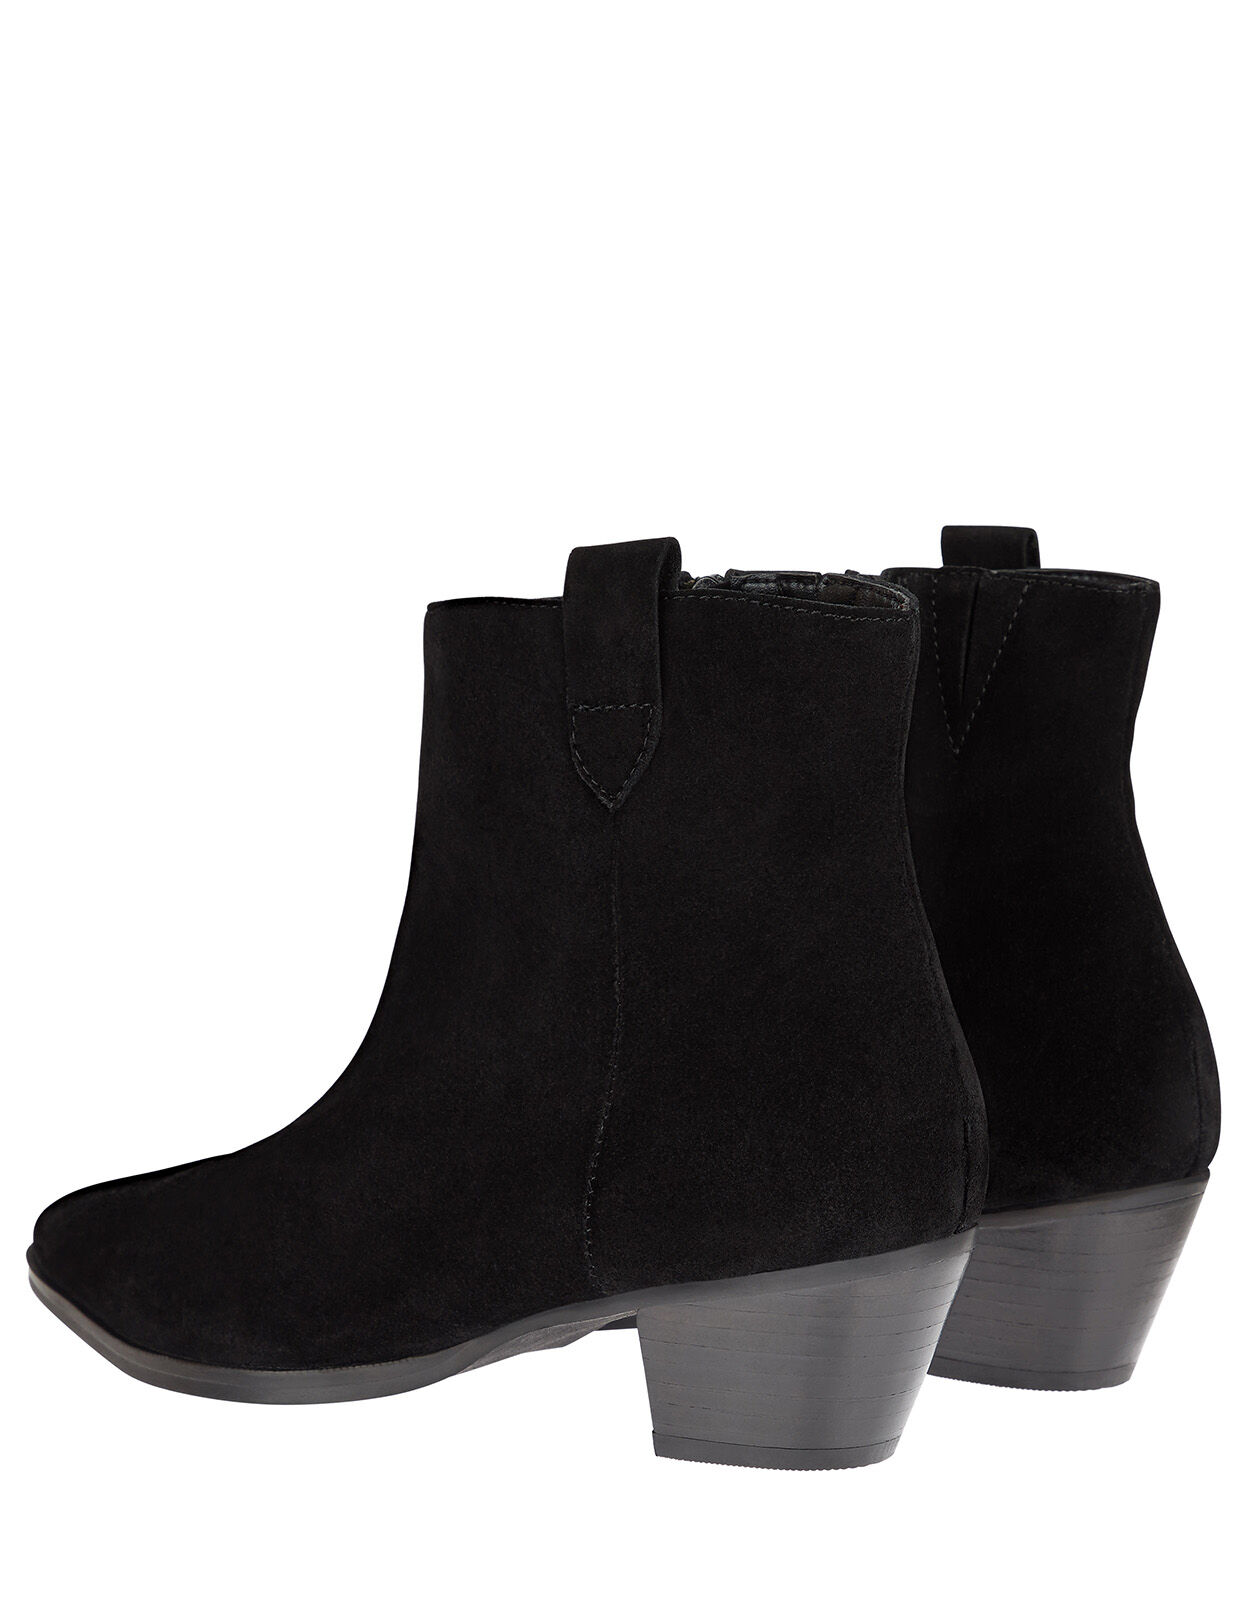 Western Suede Ankle Boots Black | Shoes 